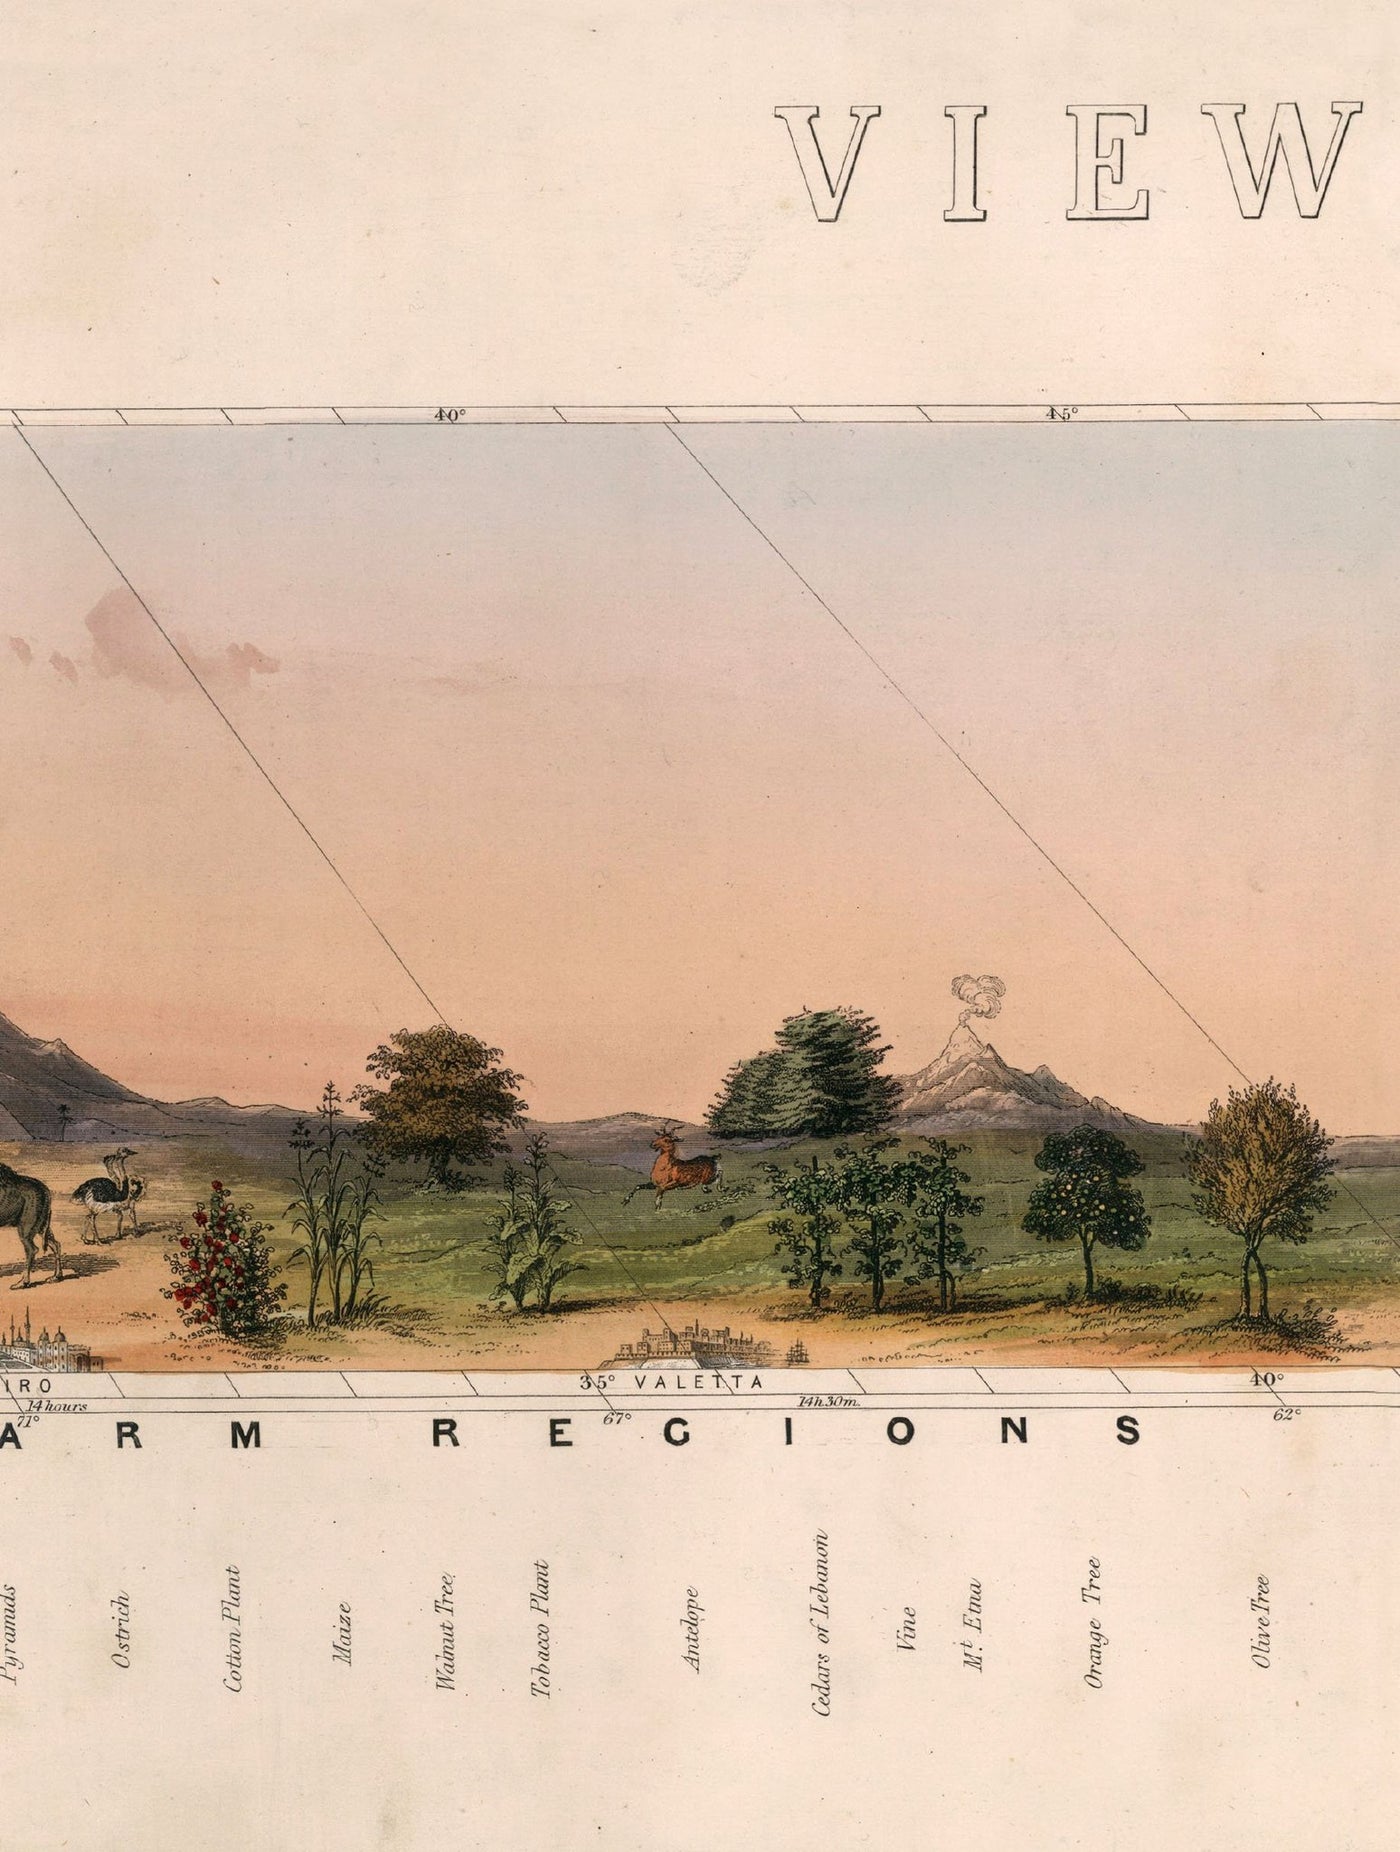 C.1852 VIEW OF NATURE IN ALL CLIMATES - FROM THE EQUATOR TO THE ARCTIC - TheArtistsQuarter